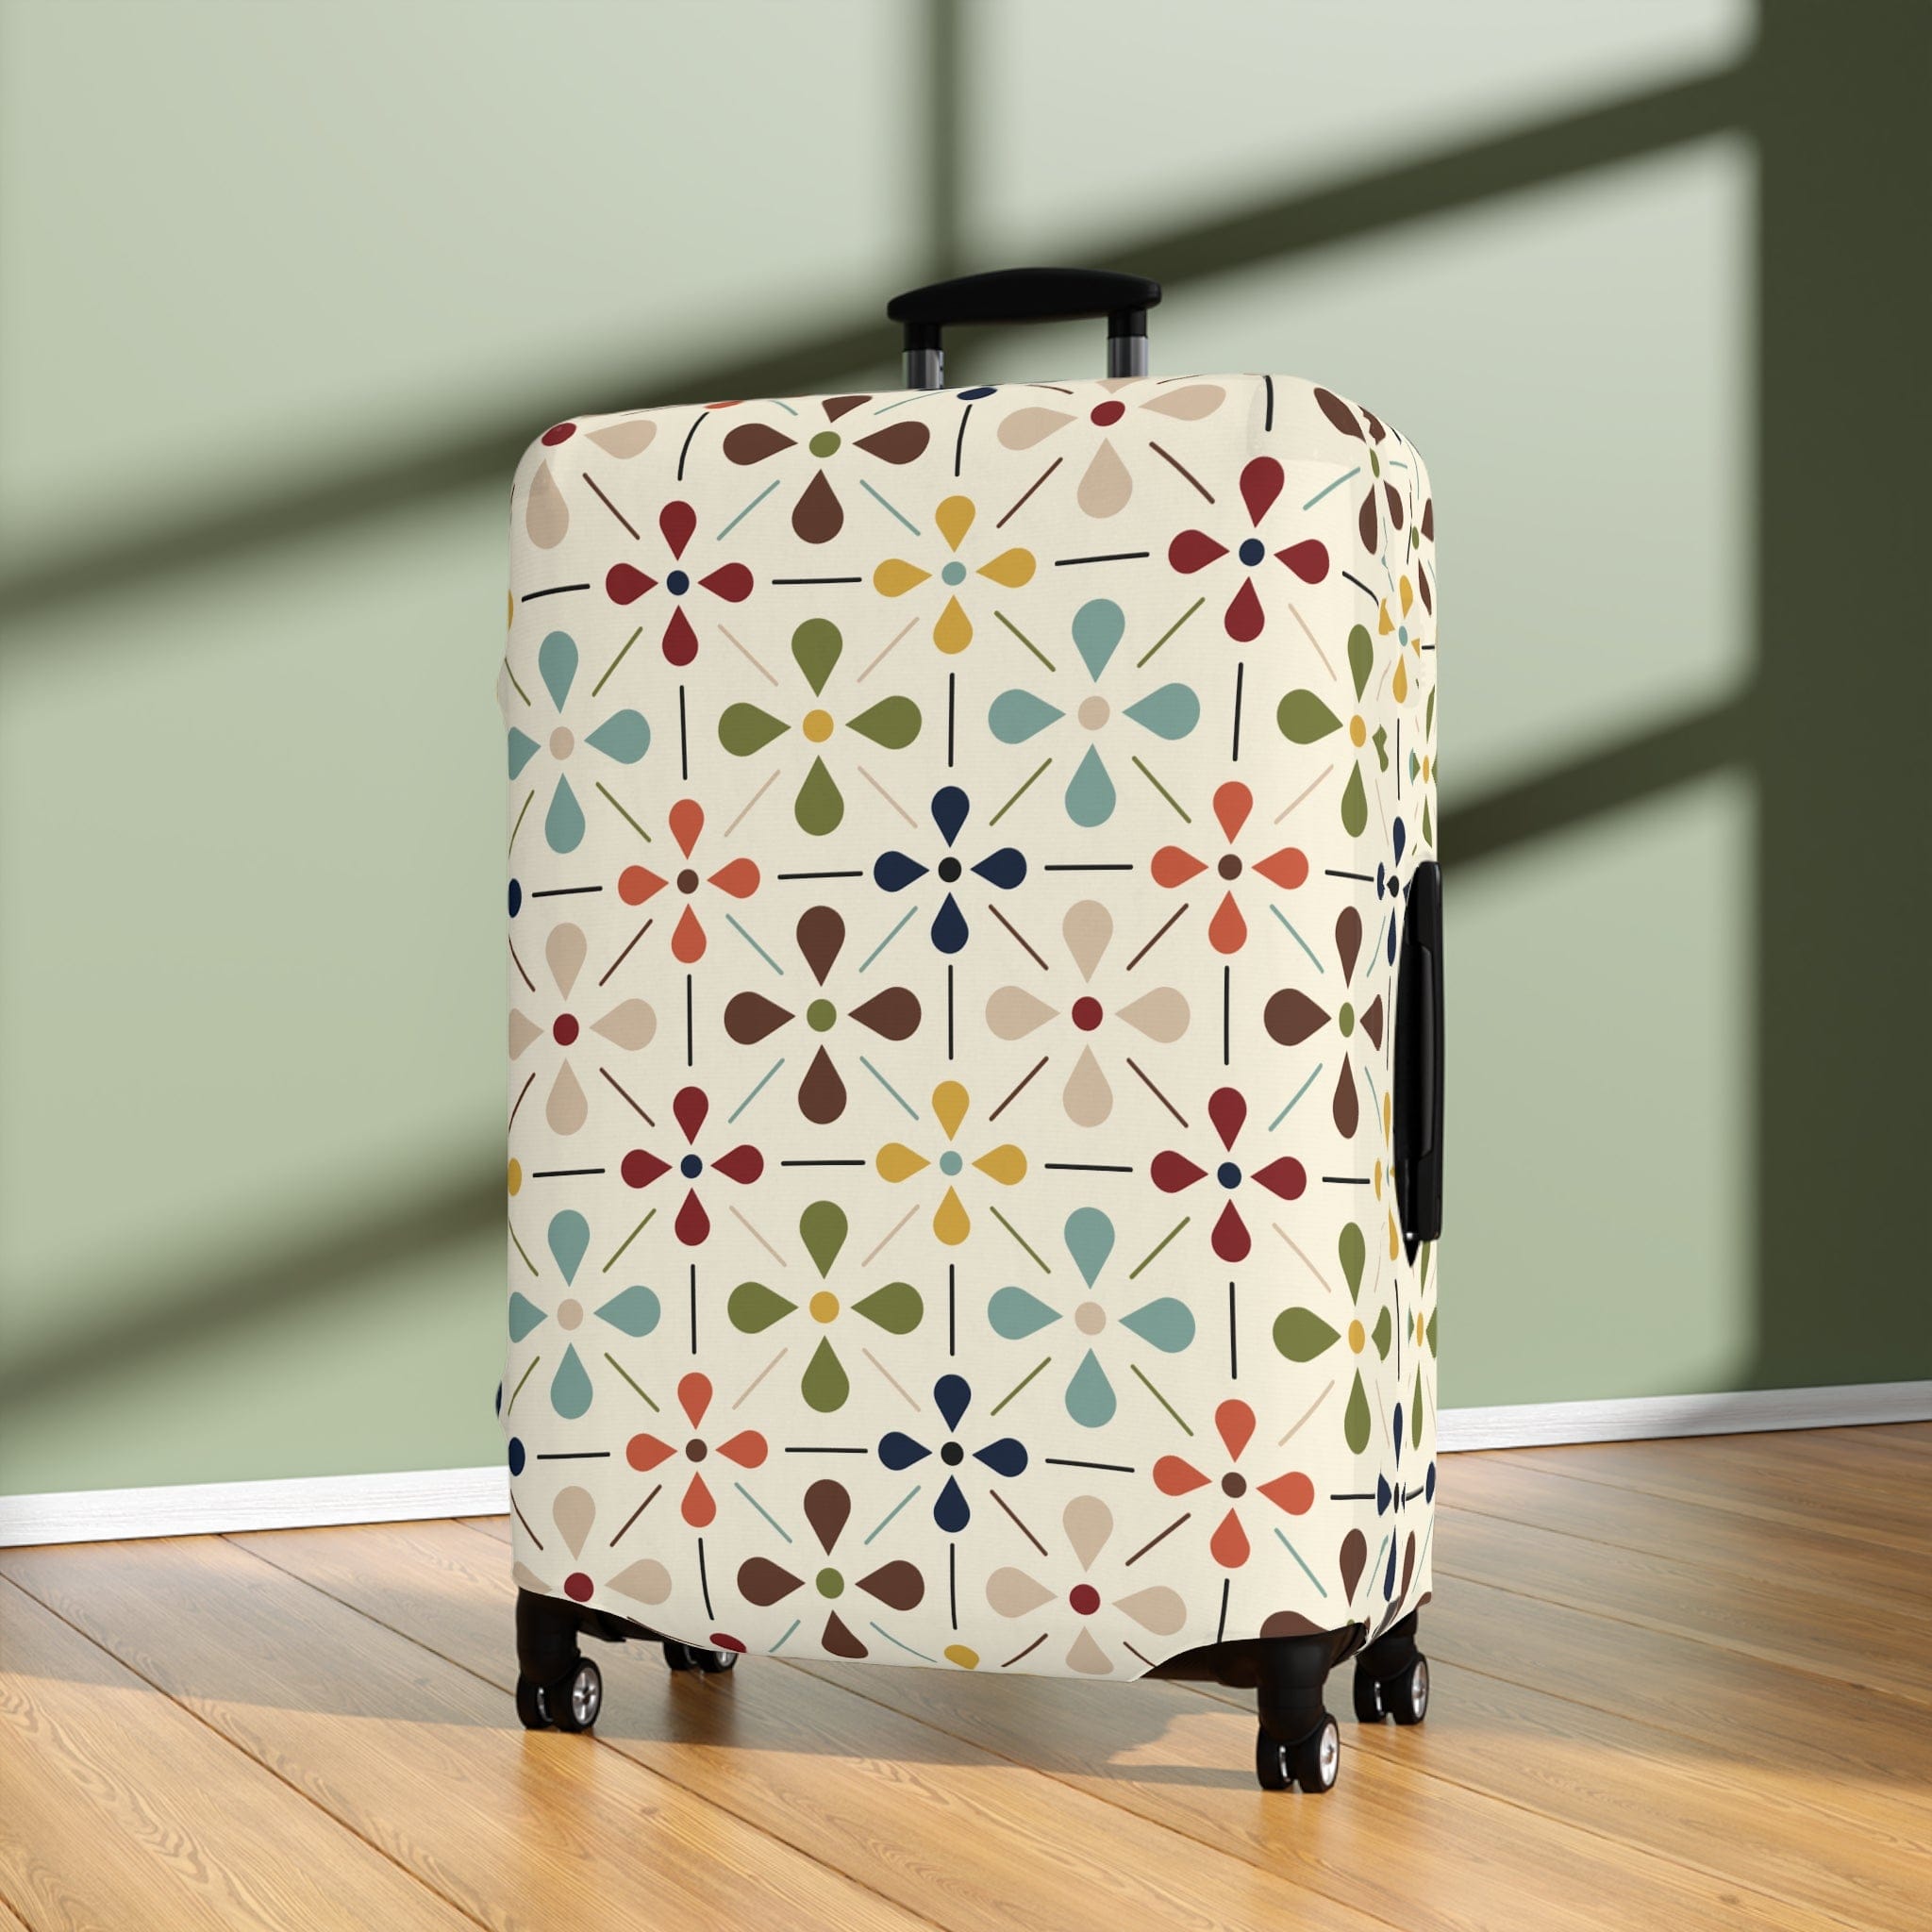 Kate McEnroe New York Mid Century Modern Retro Geometric Luggage Cover, 50s MCM Cream, Teal, Mustard, and Rust Suitcase ProtectorLuggage Covers20472524415990126192